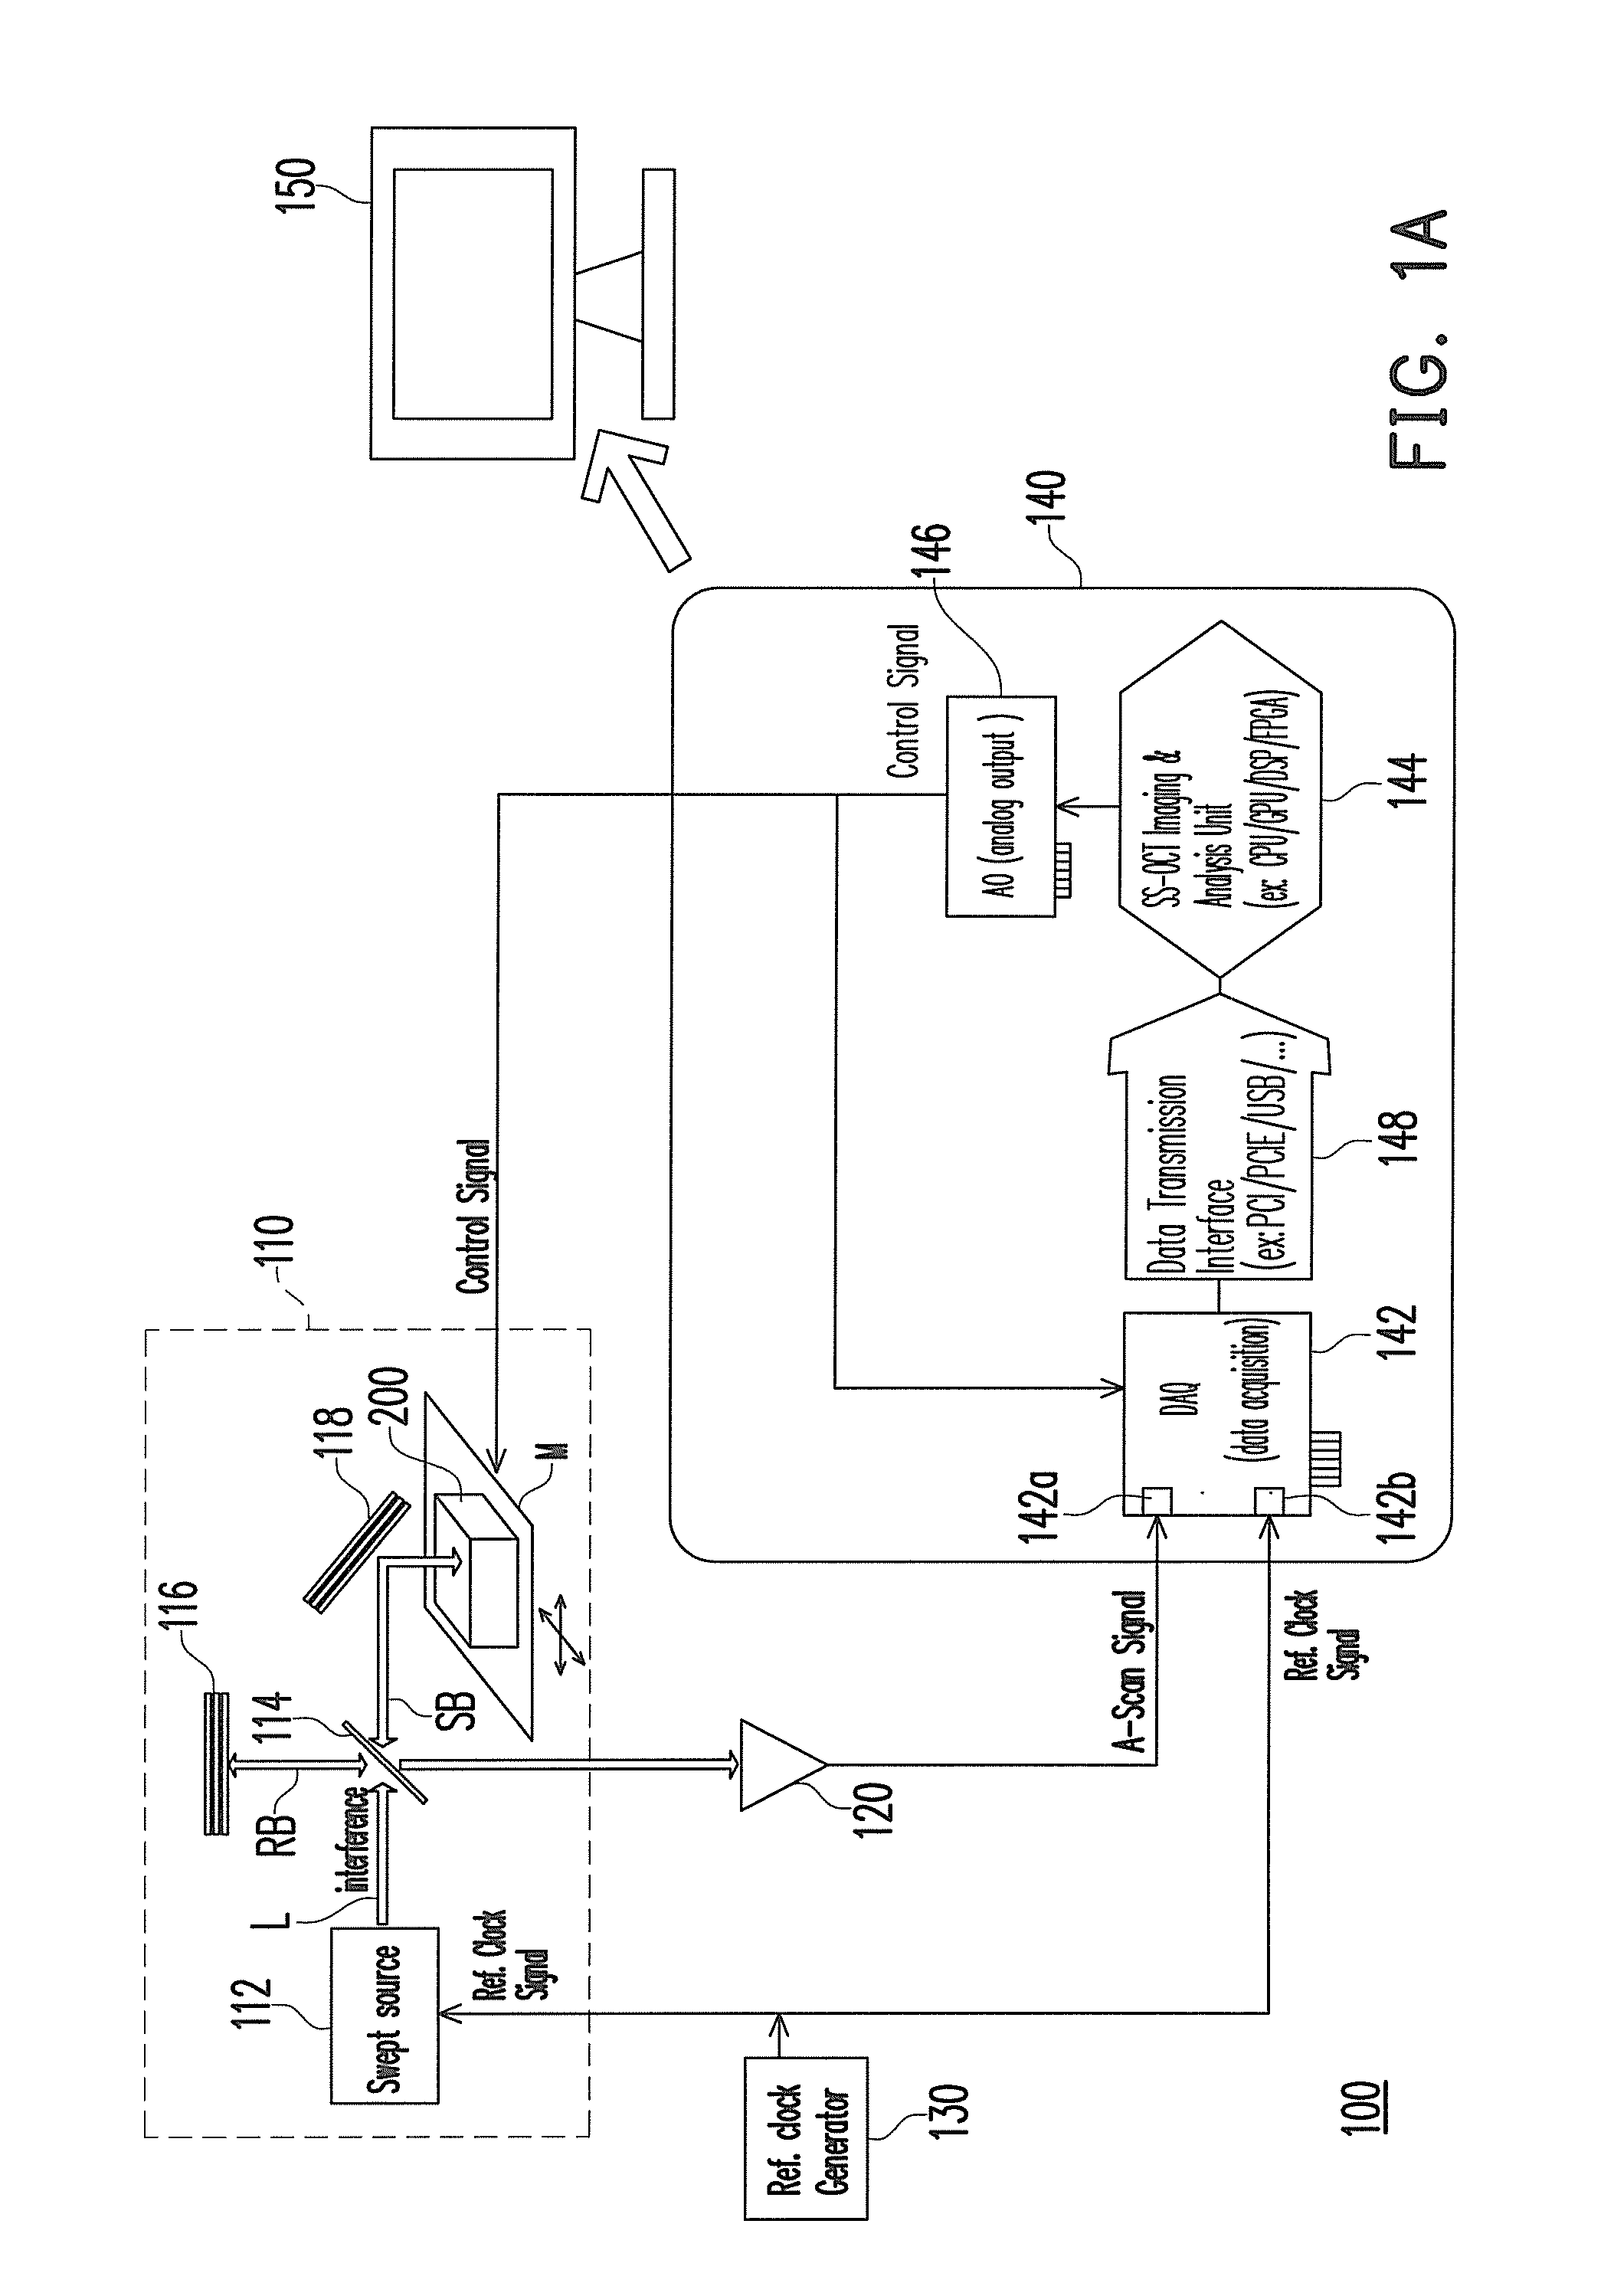 Swept source optical coherence tomography (ss-oct) system and method for processing optical imaging data